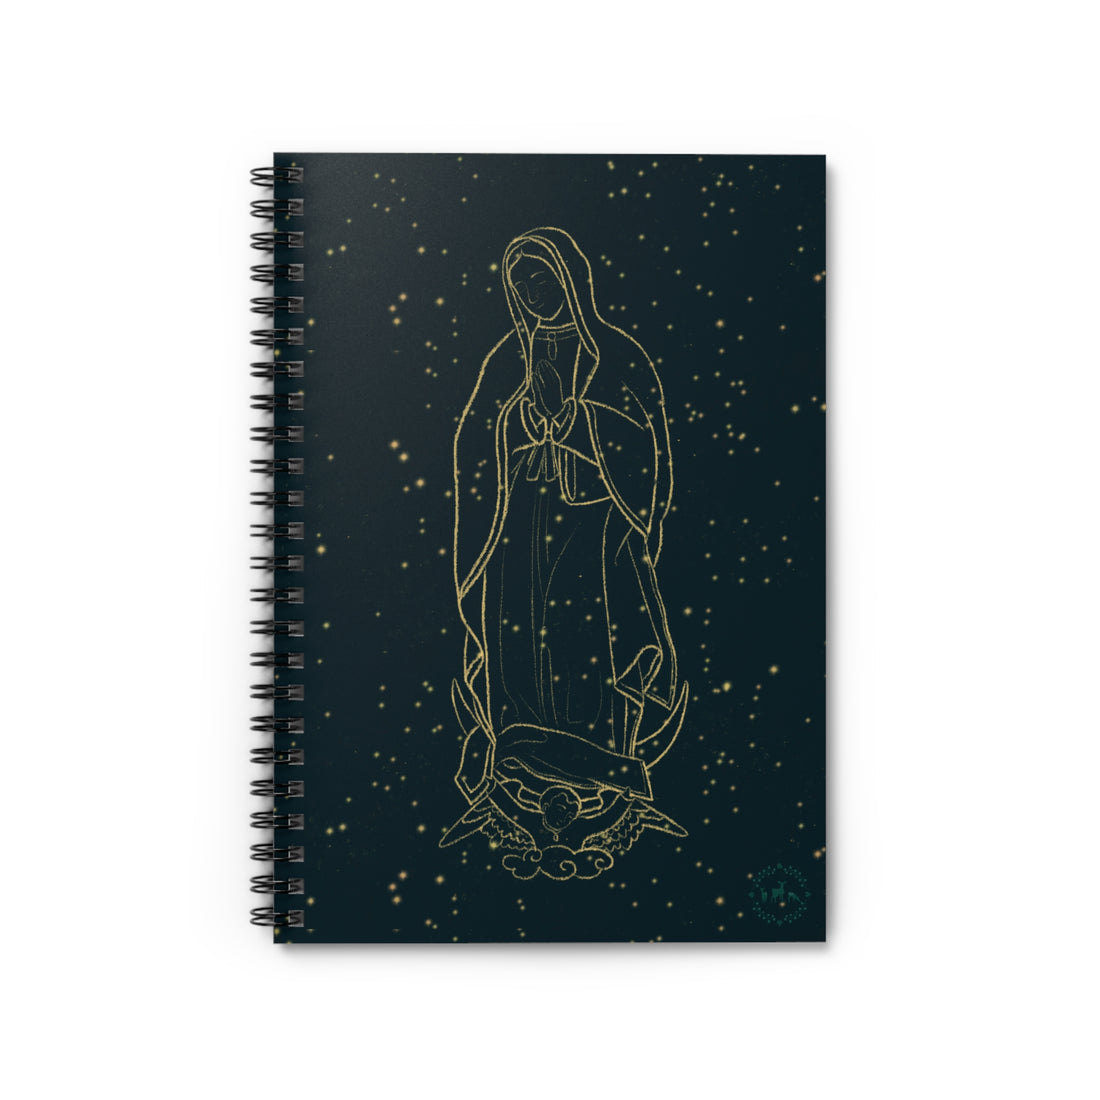 Our Lady of Guadalupe Night Sky Journal - Ruled Line